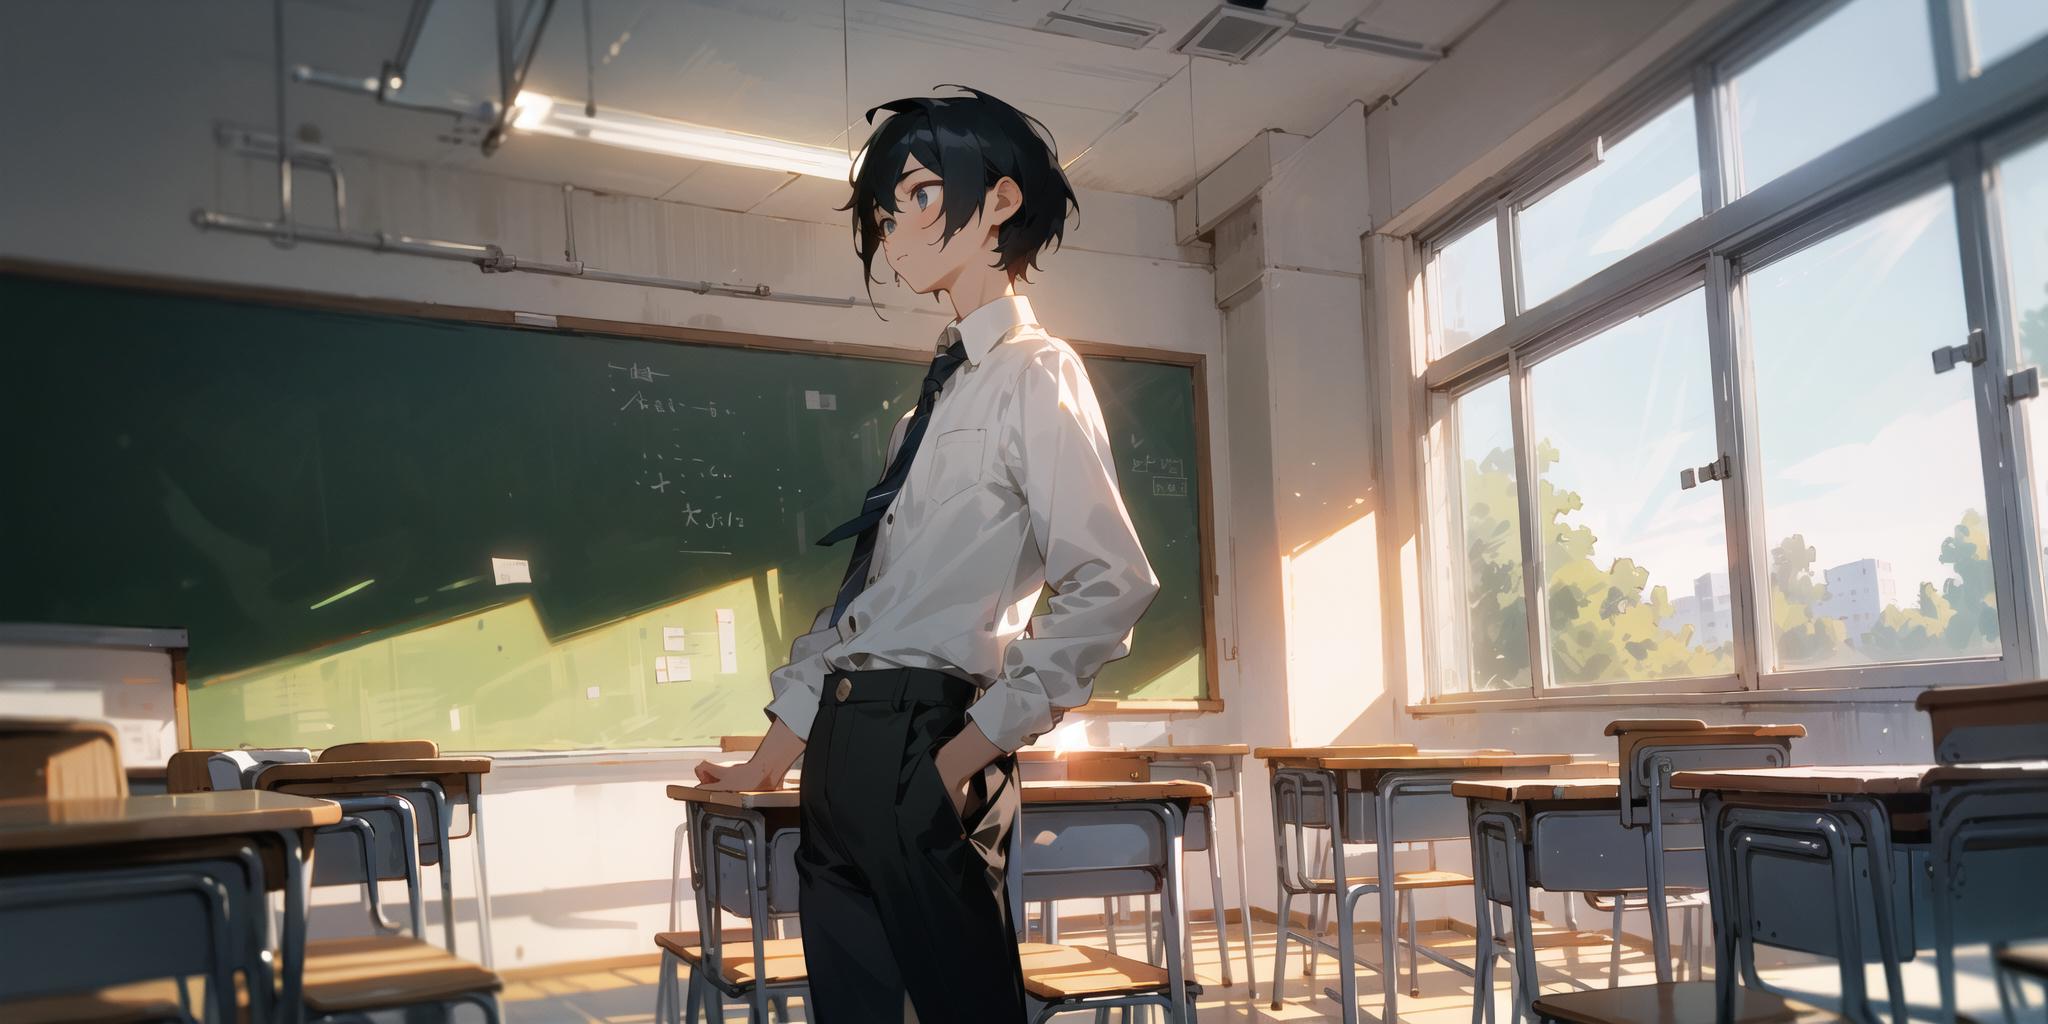 Anime Drawing of a Boy in a Classroom with Chalkboard and Desks